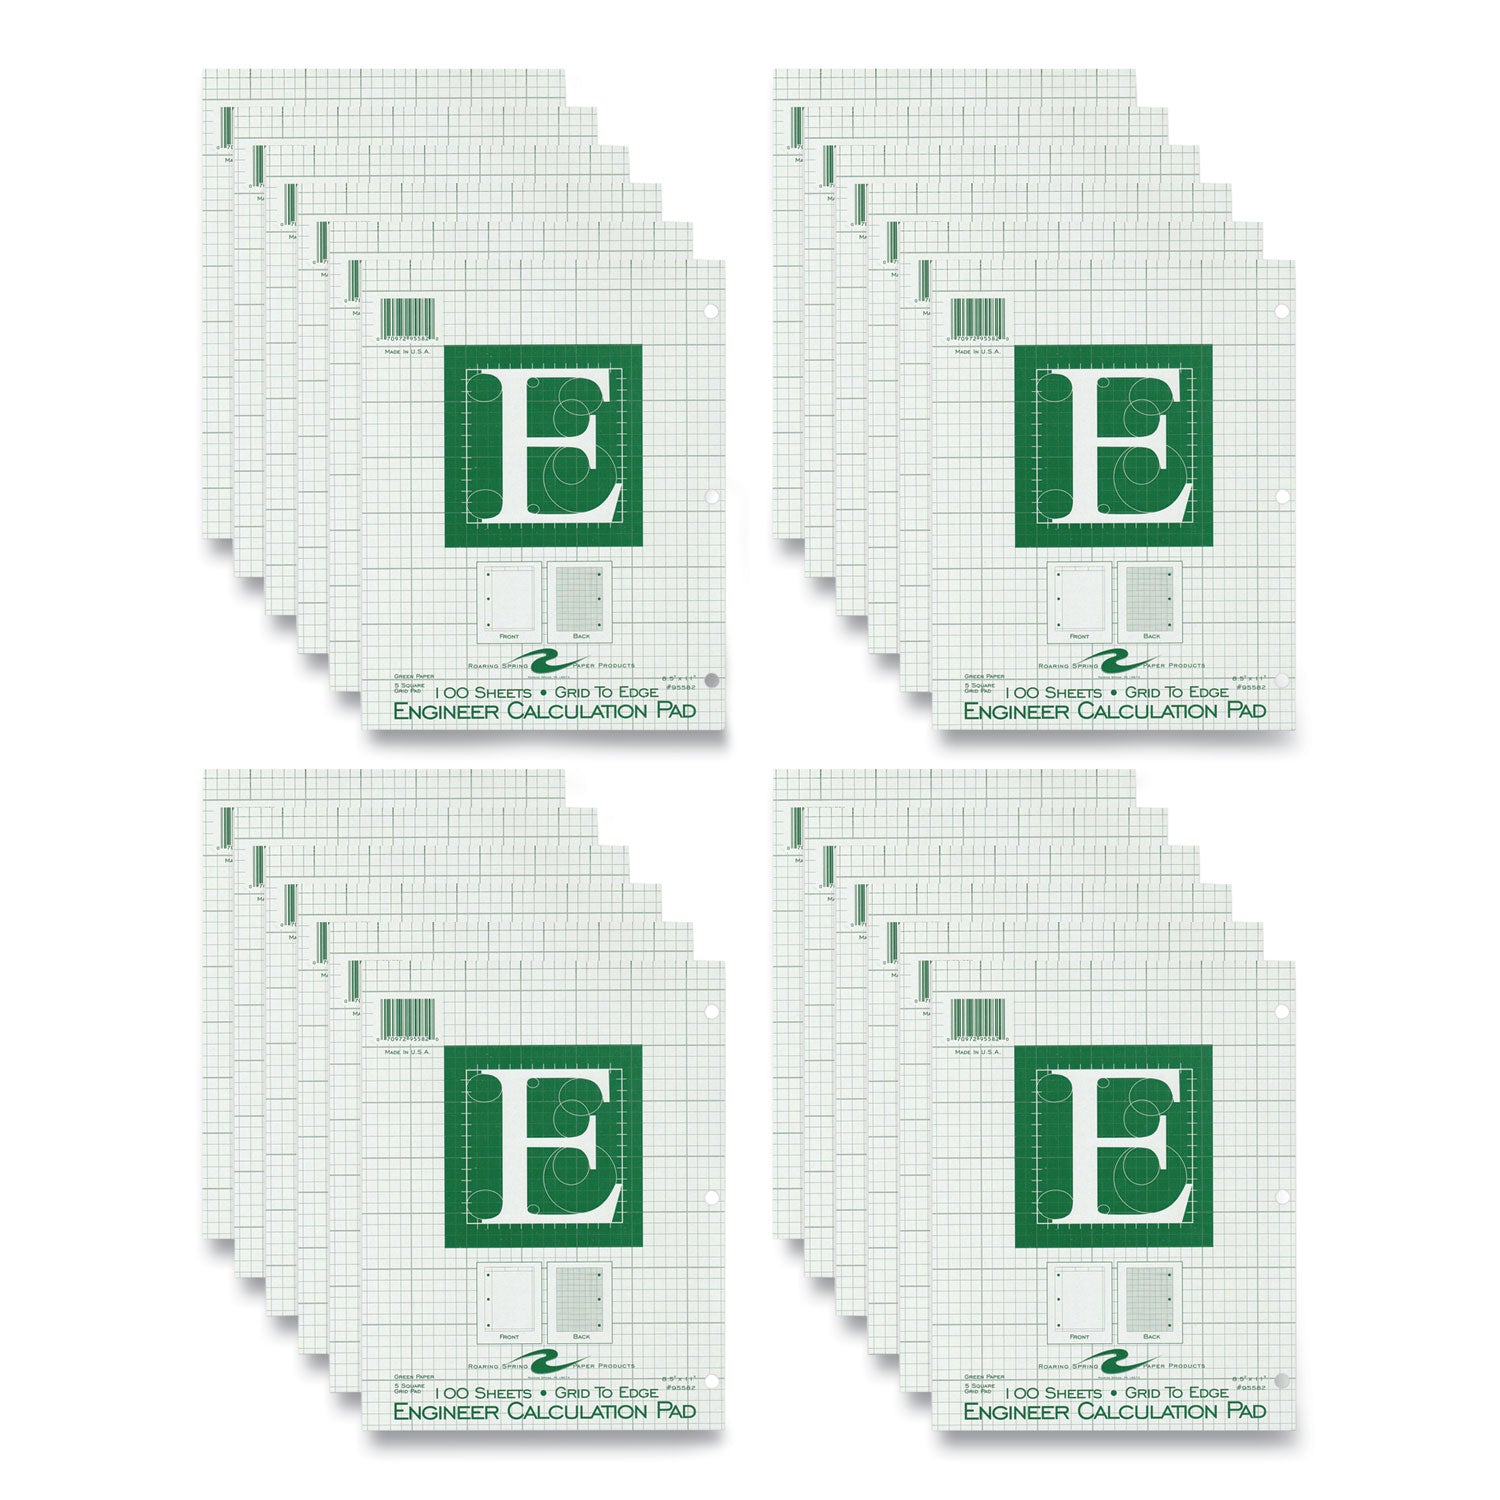 engineer-pad-125-margin-quad-rule-5-sq-in-1-sq-in-100-lt-green-85x11-sheets-pad-24-ct-ships-in-4-6-business-days_roa95582cs - 1